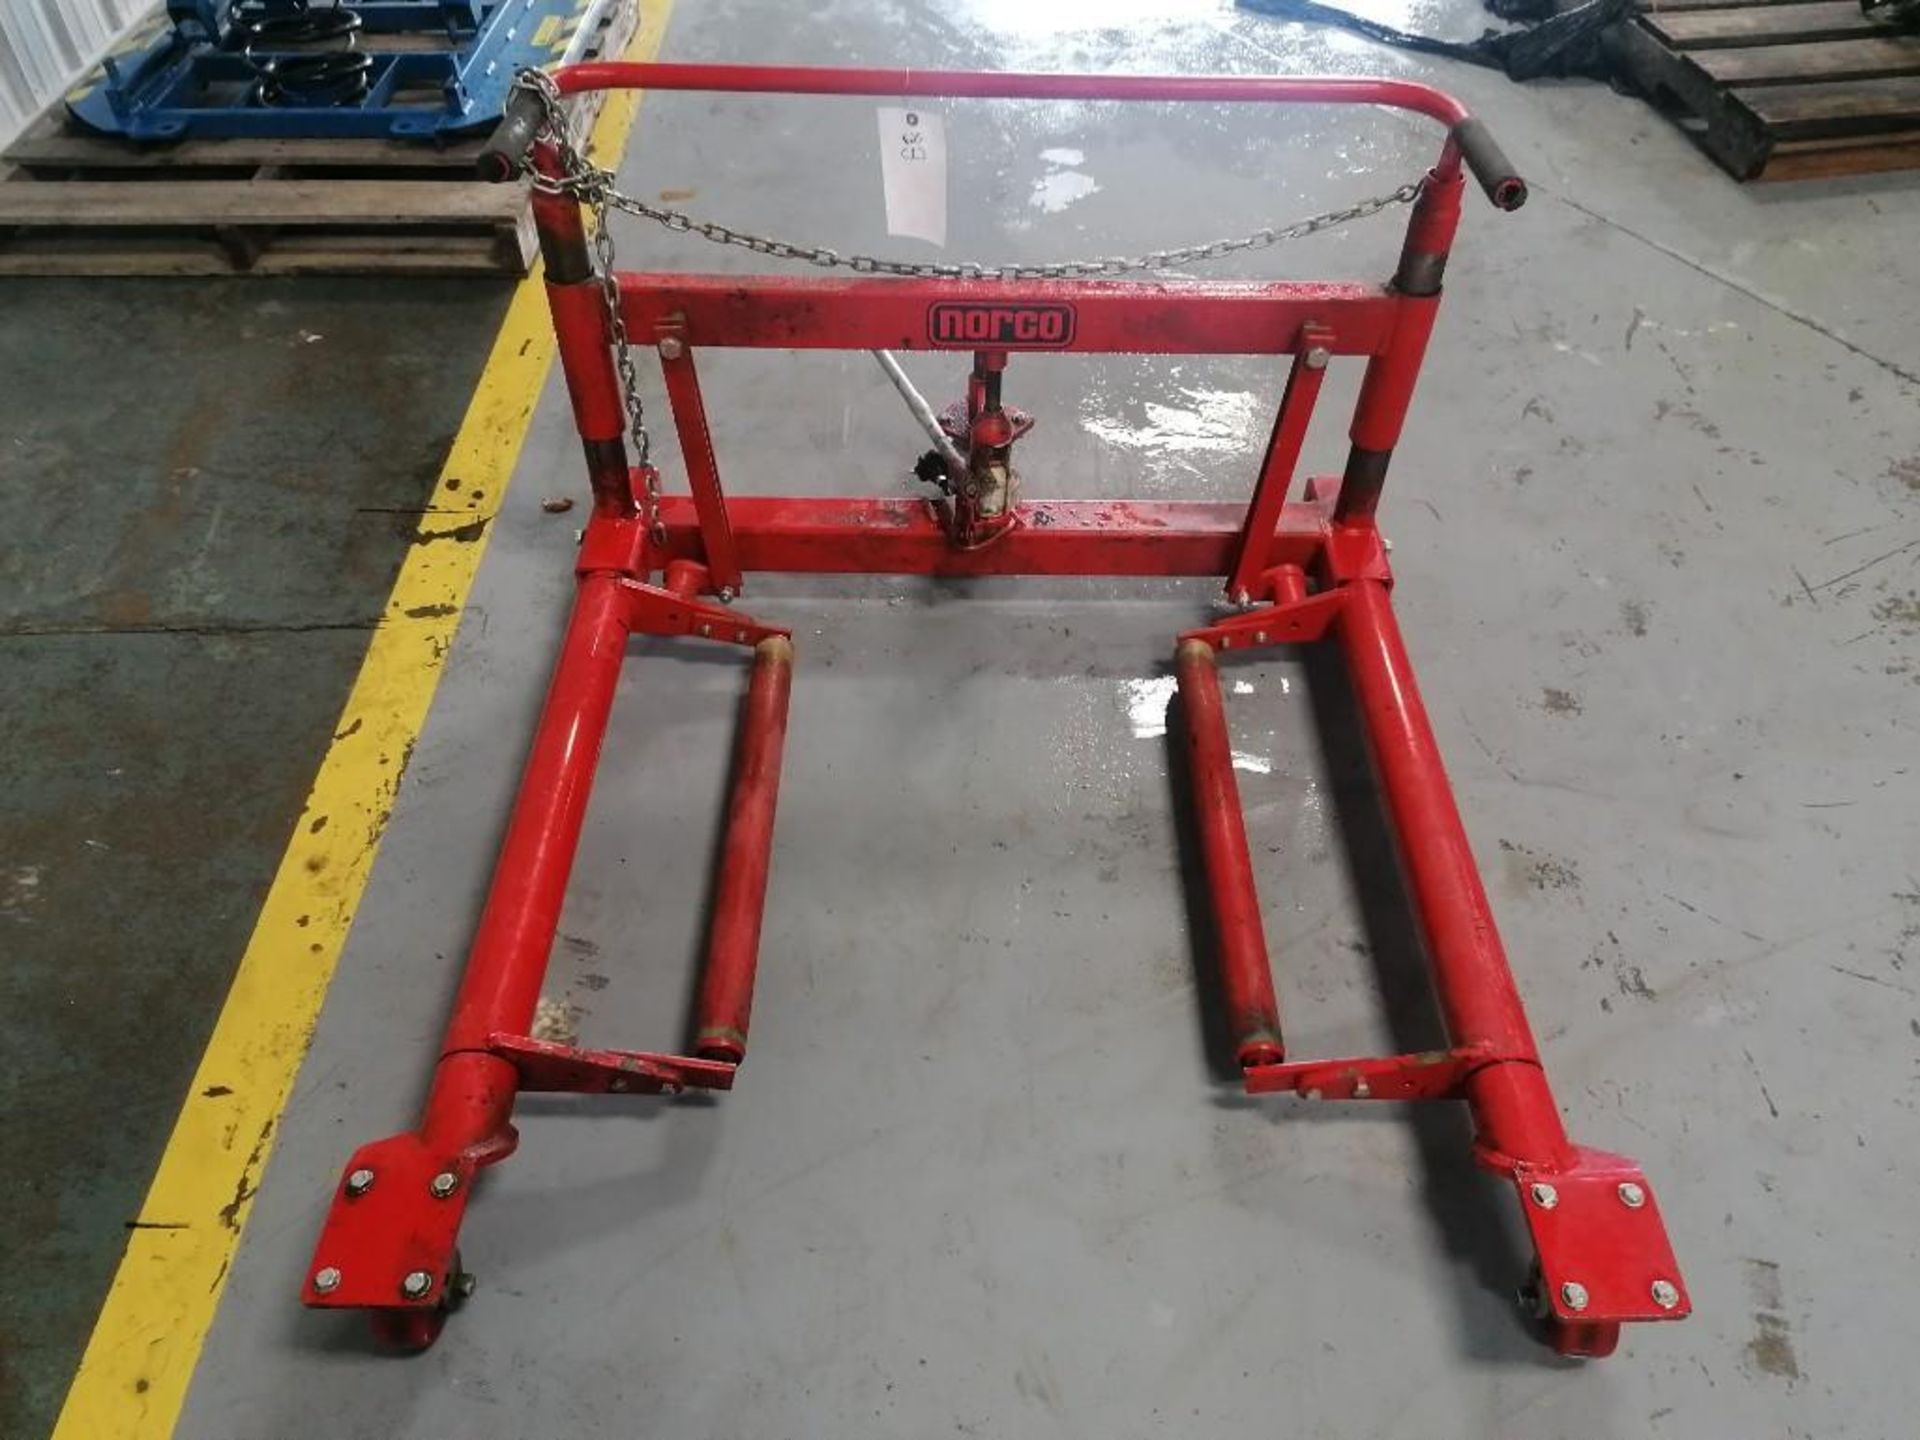 (1) NORCO 1 TON Capacity Wheel Dolly, Model 82300D. Located at 301 E Henry Street, Mt. Pleasant, - Image 2 of 5